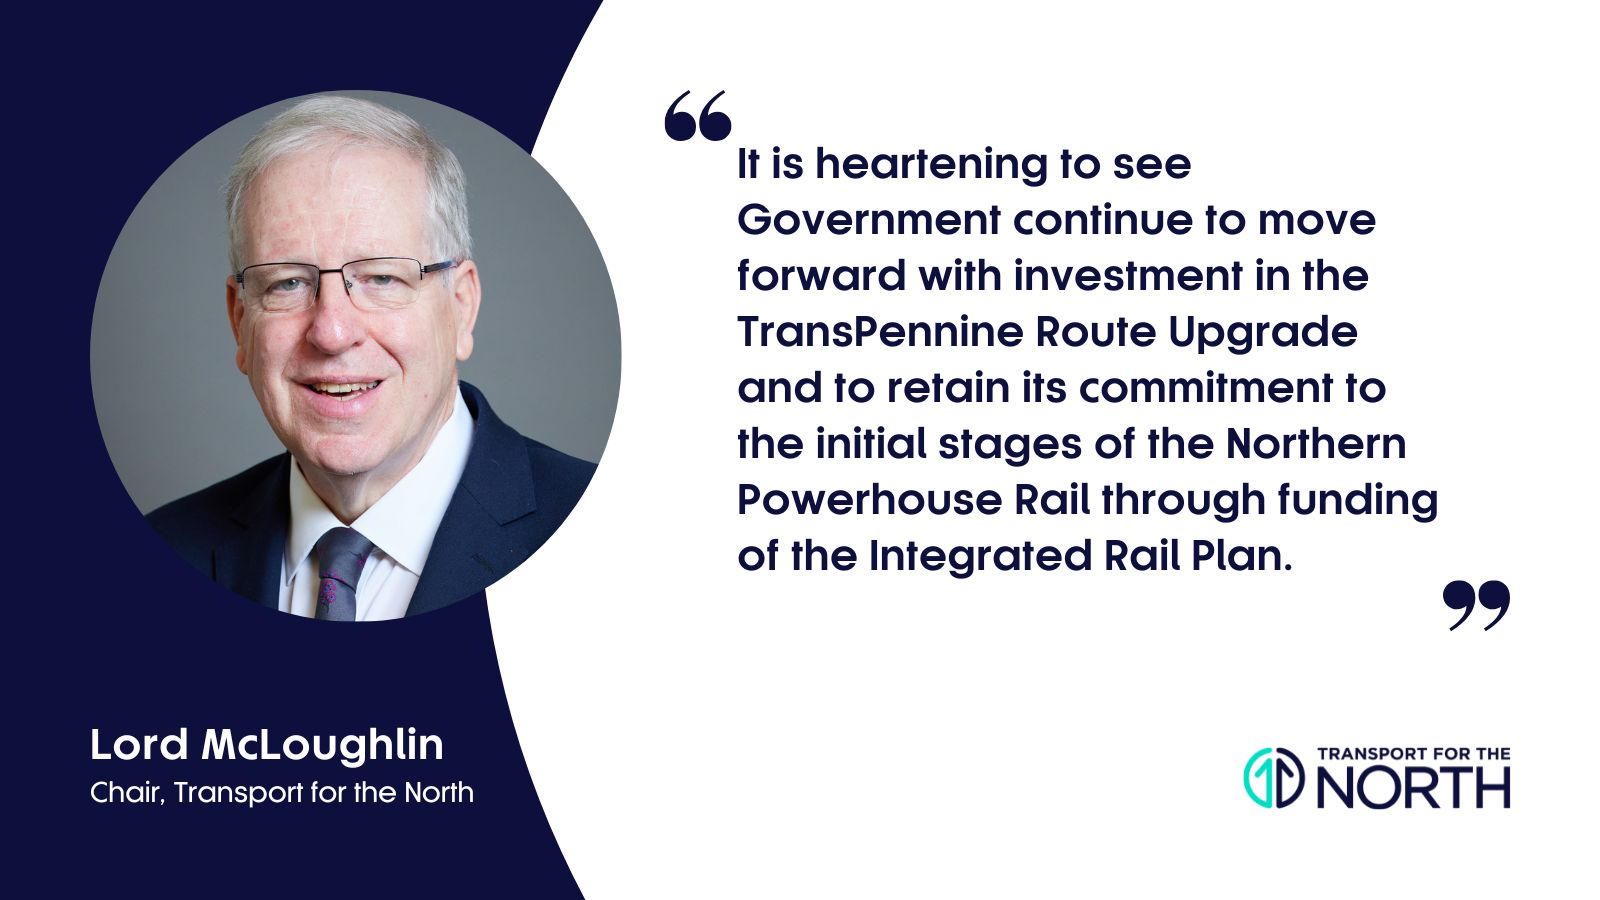 Quote by Lord McLoughlin on the TransPennine Route Upgrade work